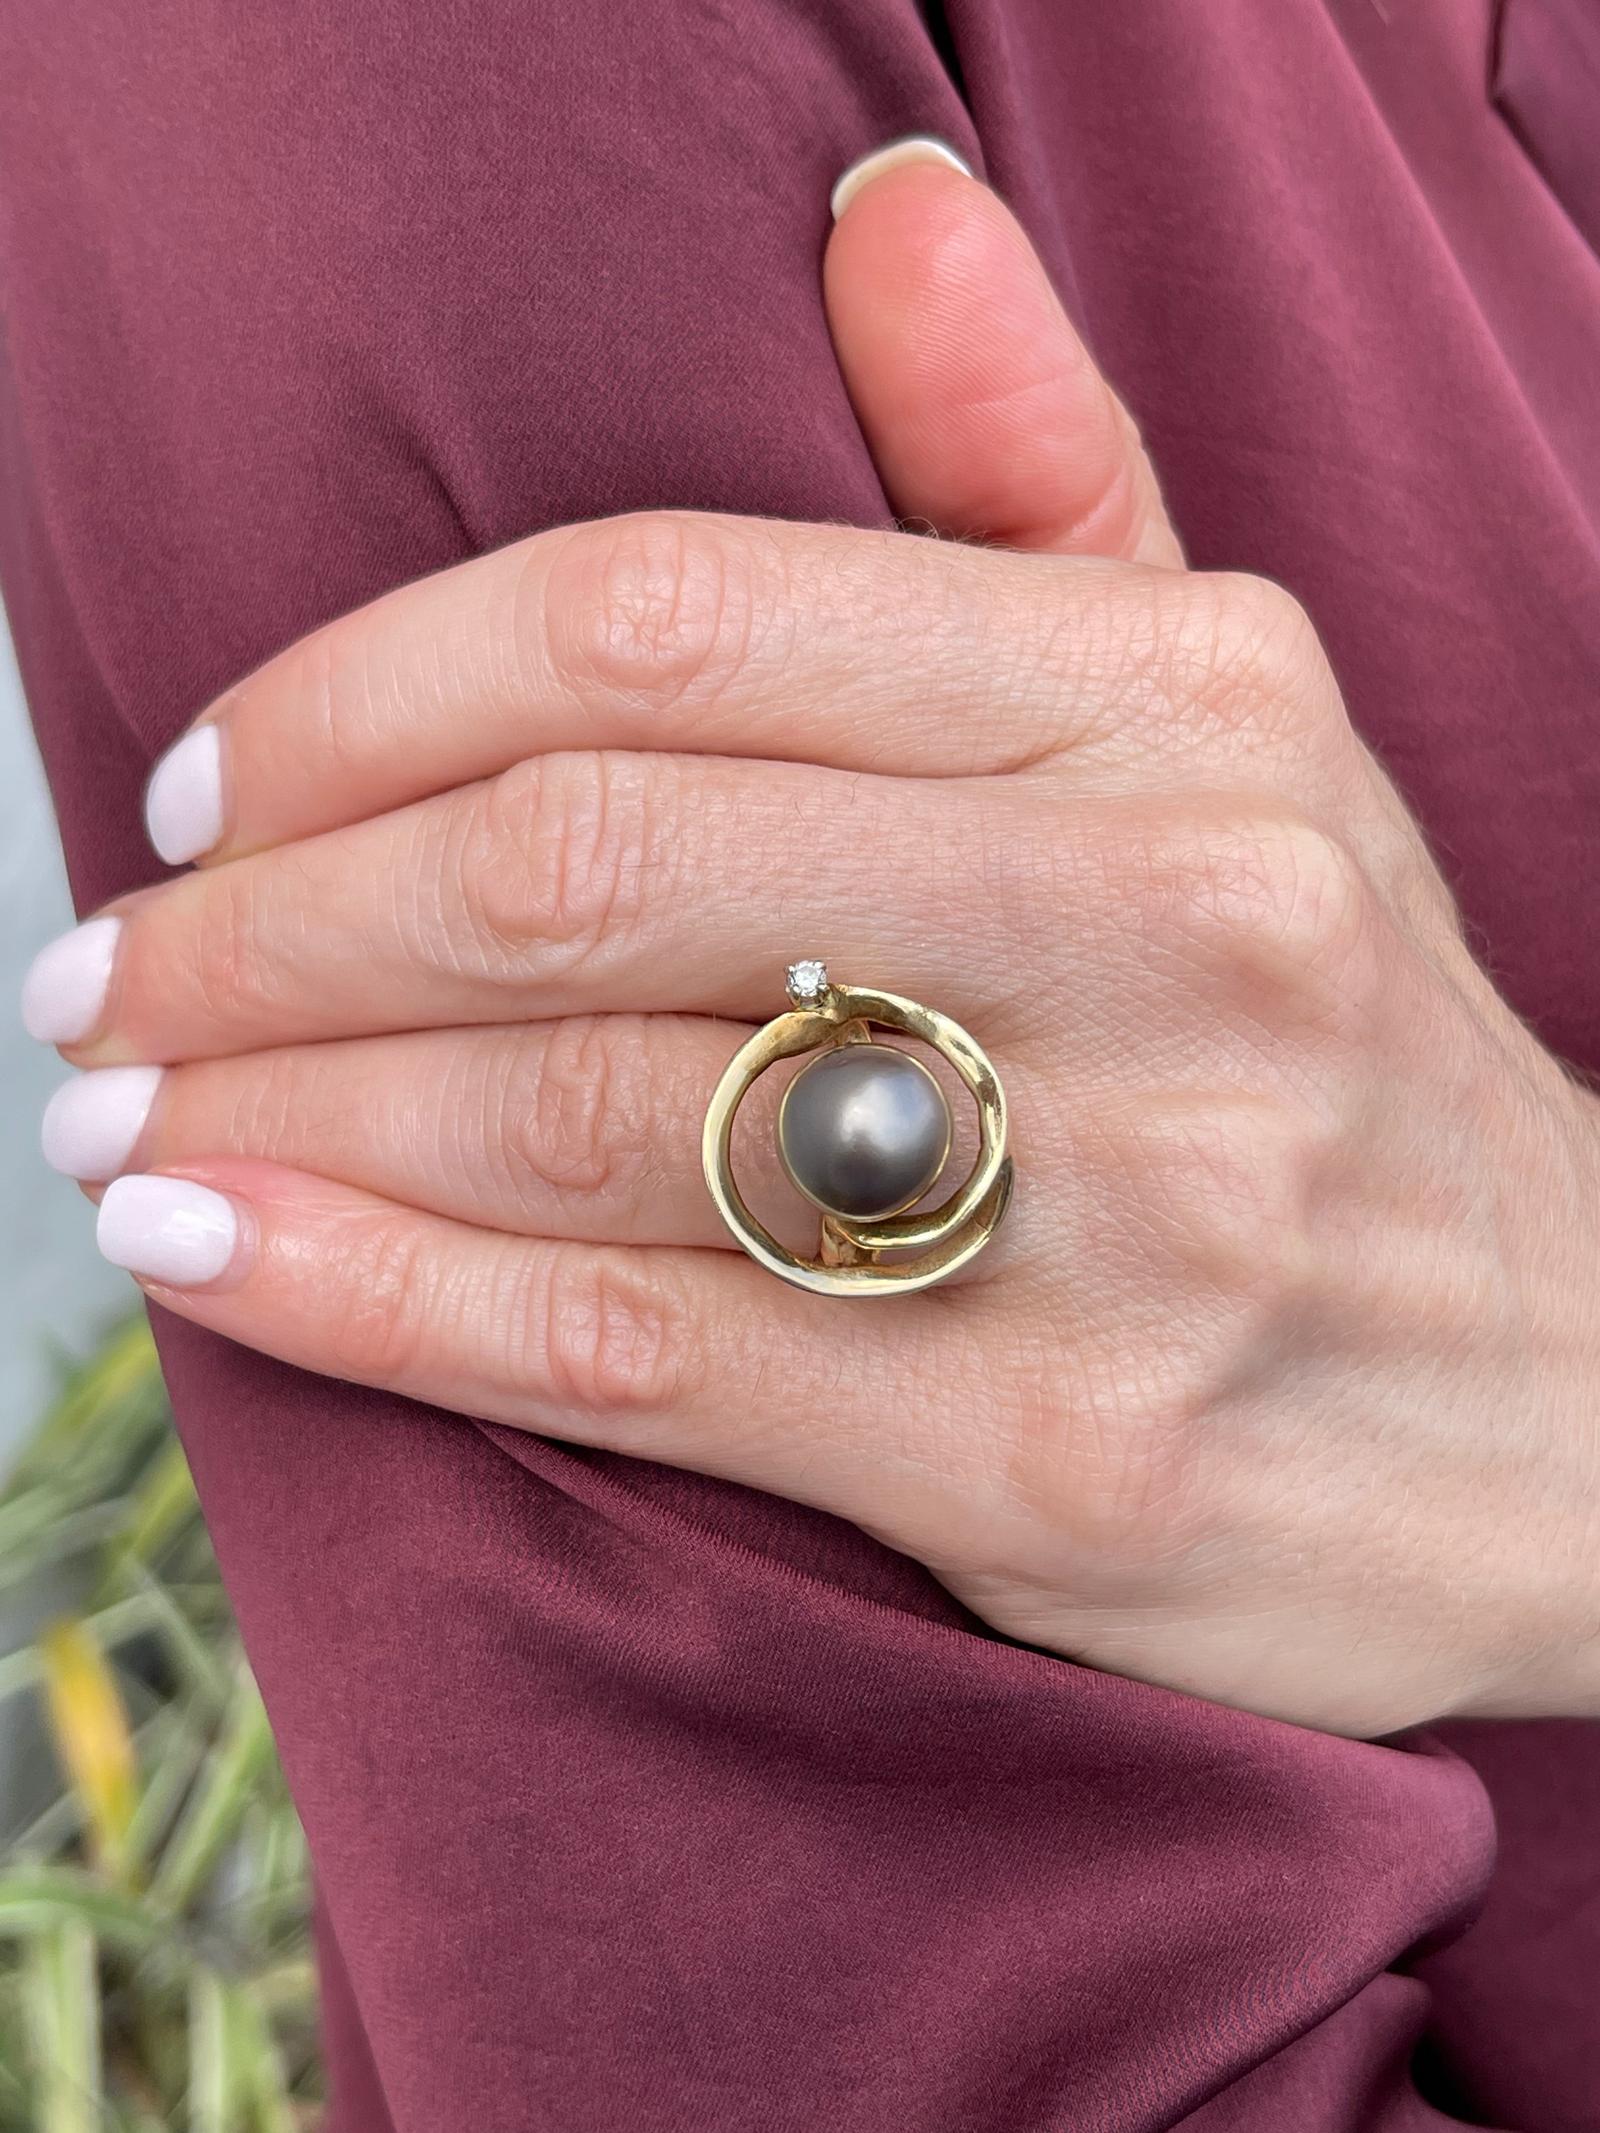 South Sea pearl and diamond ring handcrafted in 14 karat yellow gold. The ring features an 11.5mm South Sea pearl and a round brilliant cut diamond weighing approximately .06 carats. The open circular ring measures 20 x 20mm on top and is currently